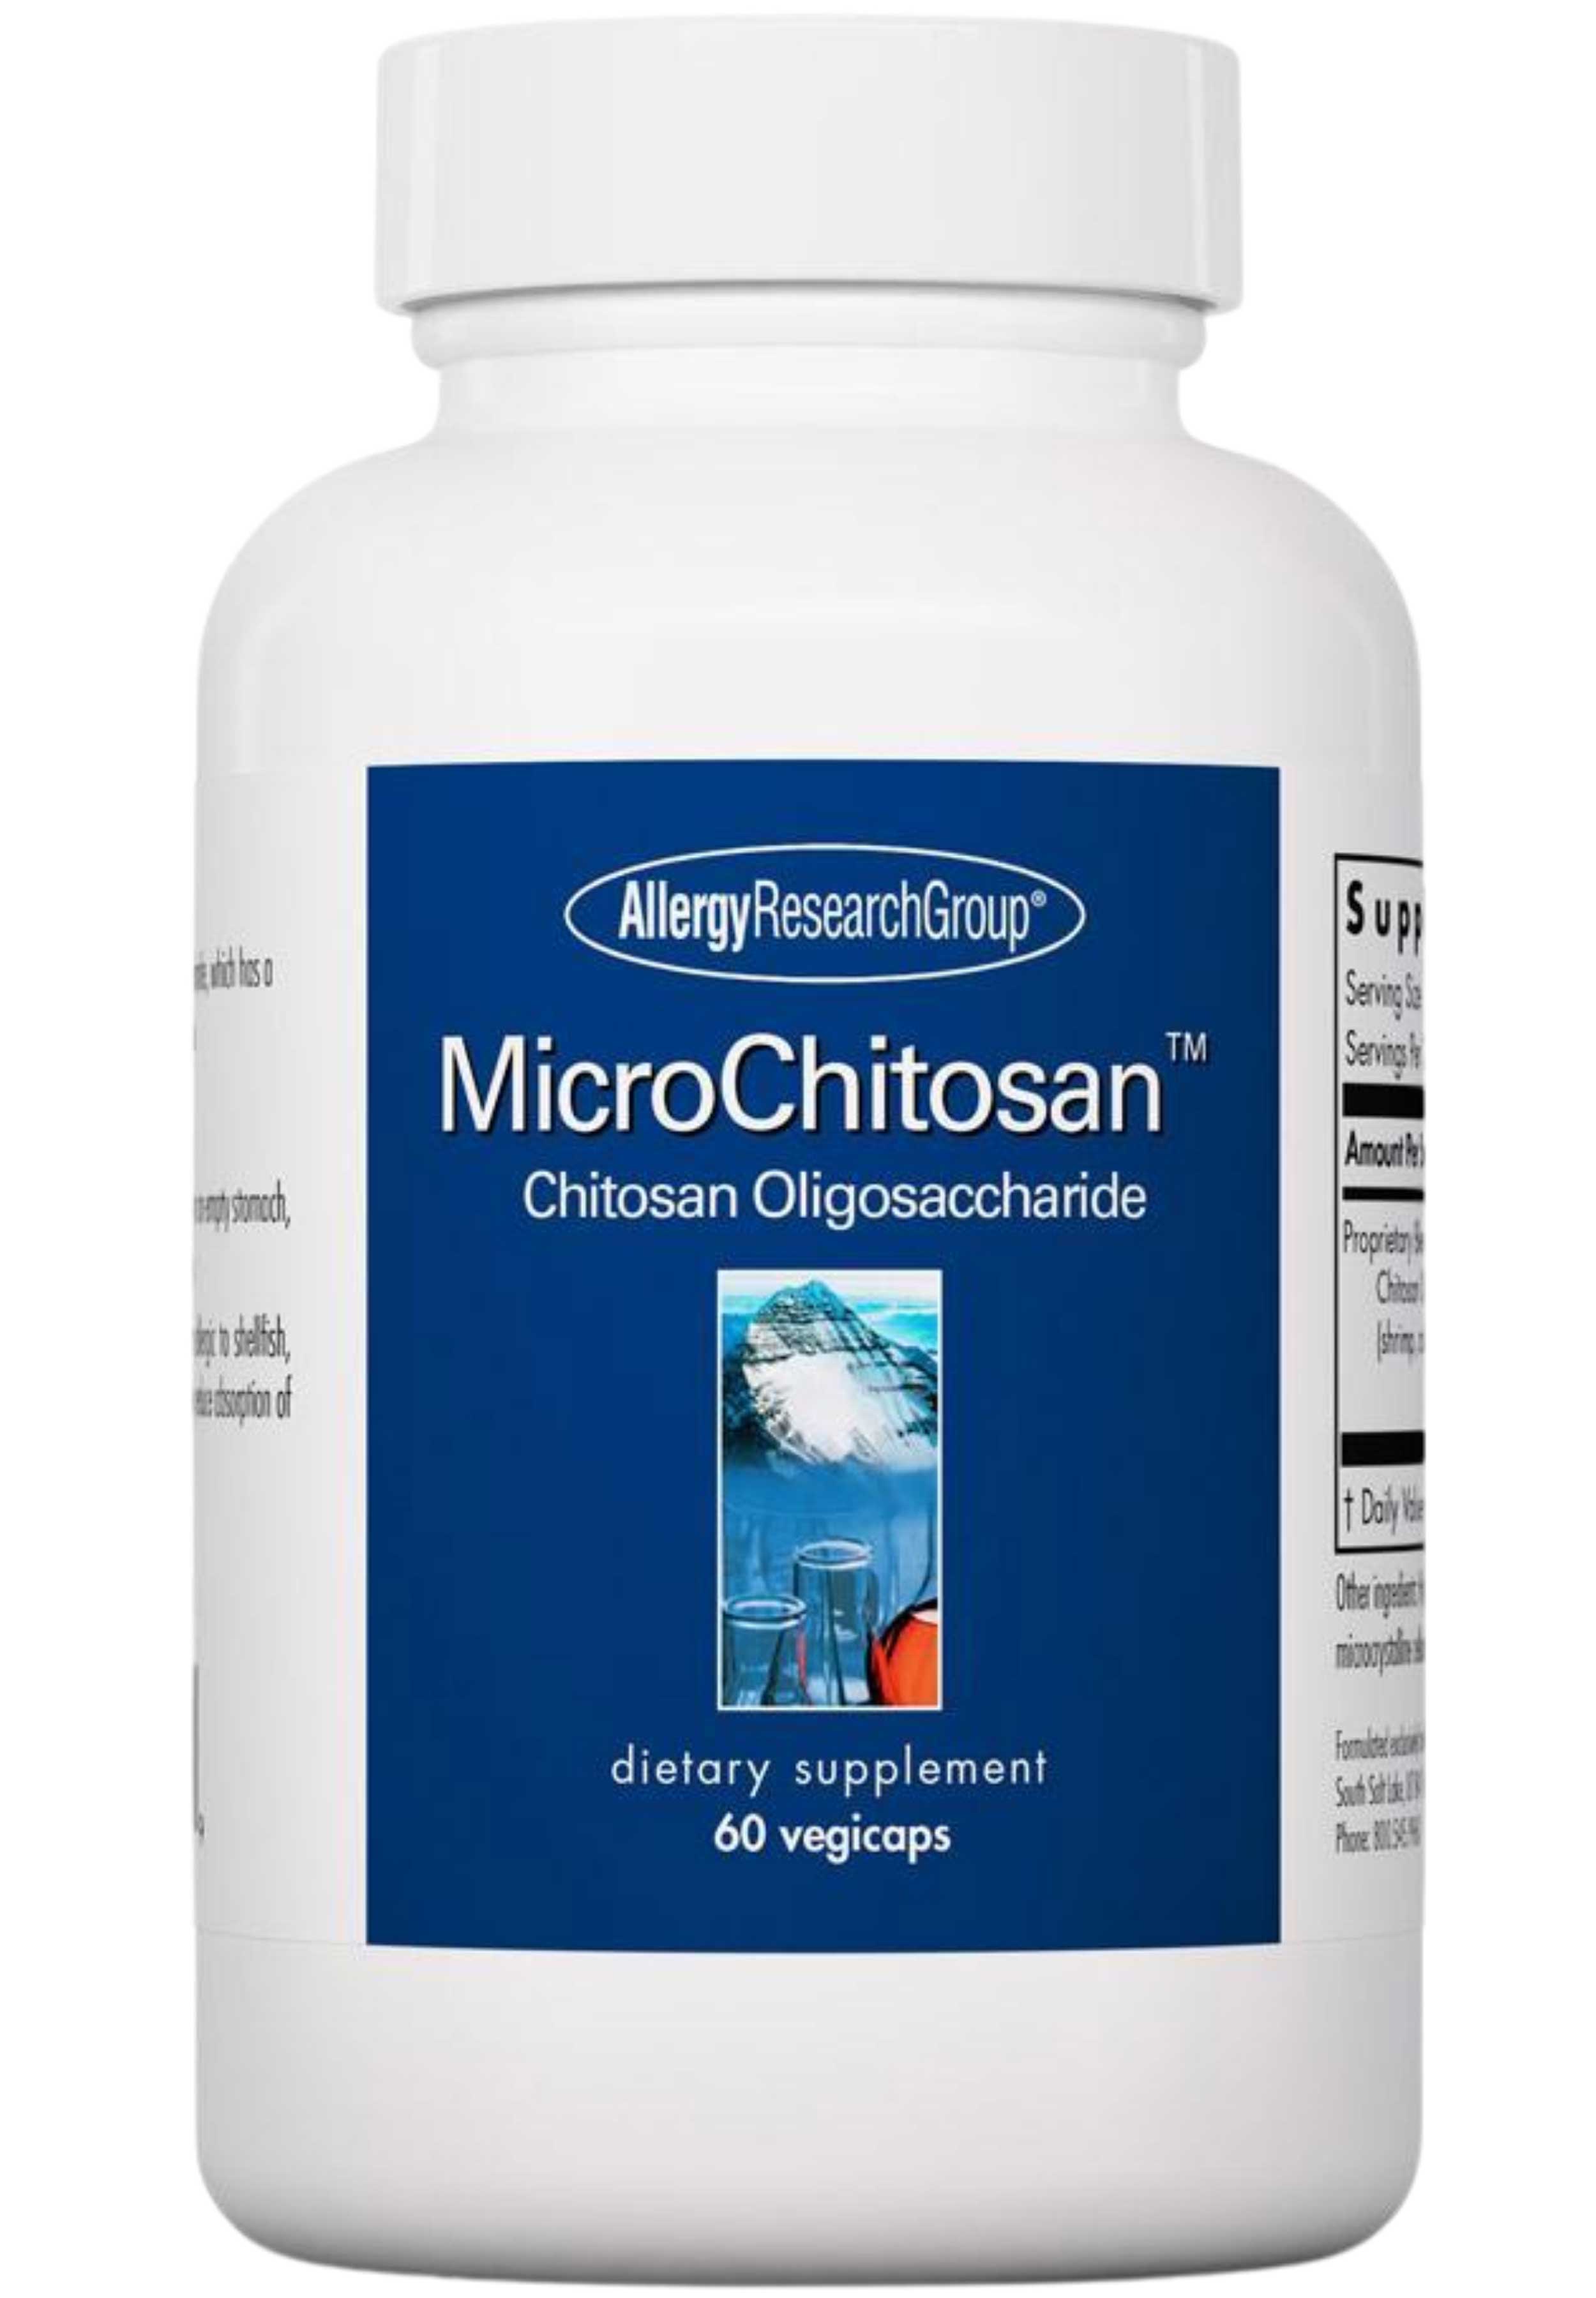 Allergy Research Group MicroChitosan